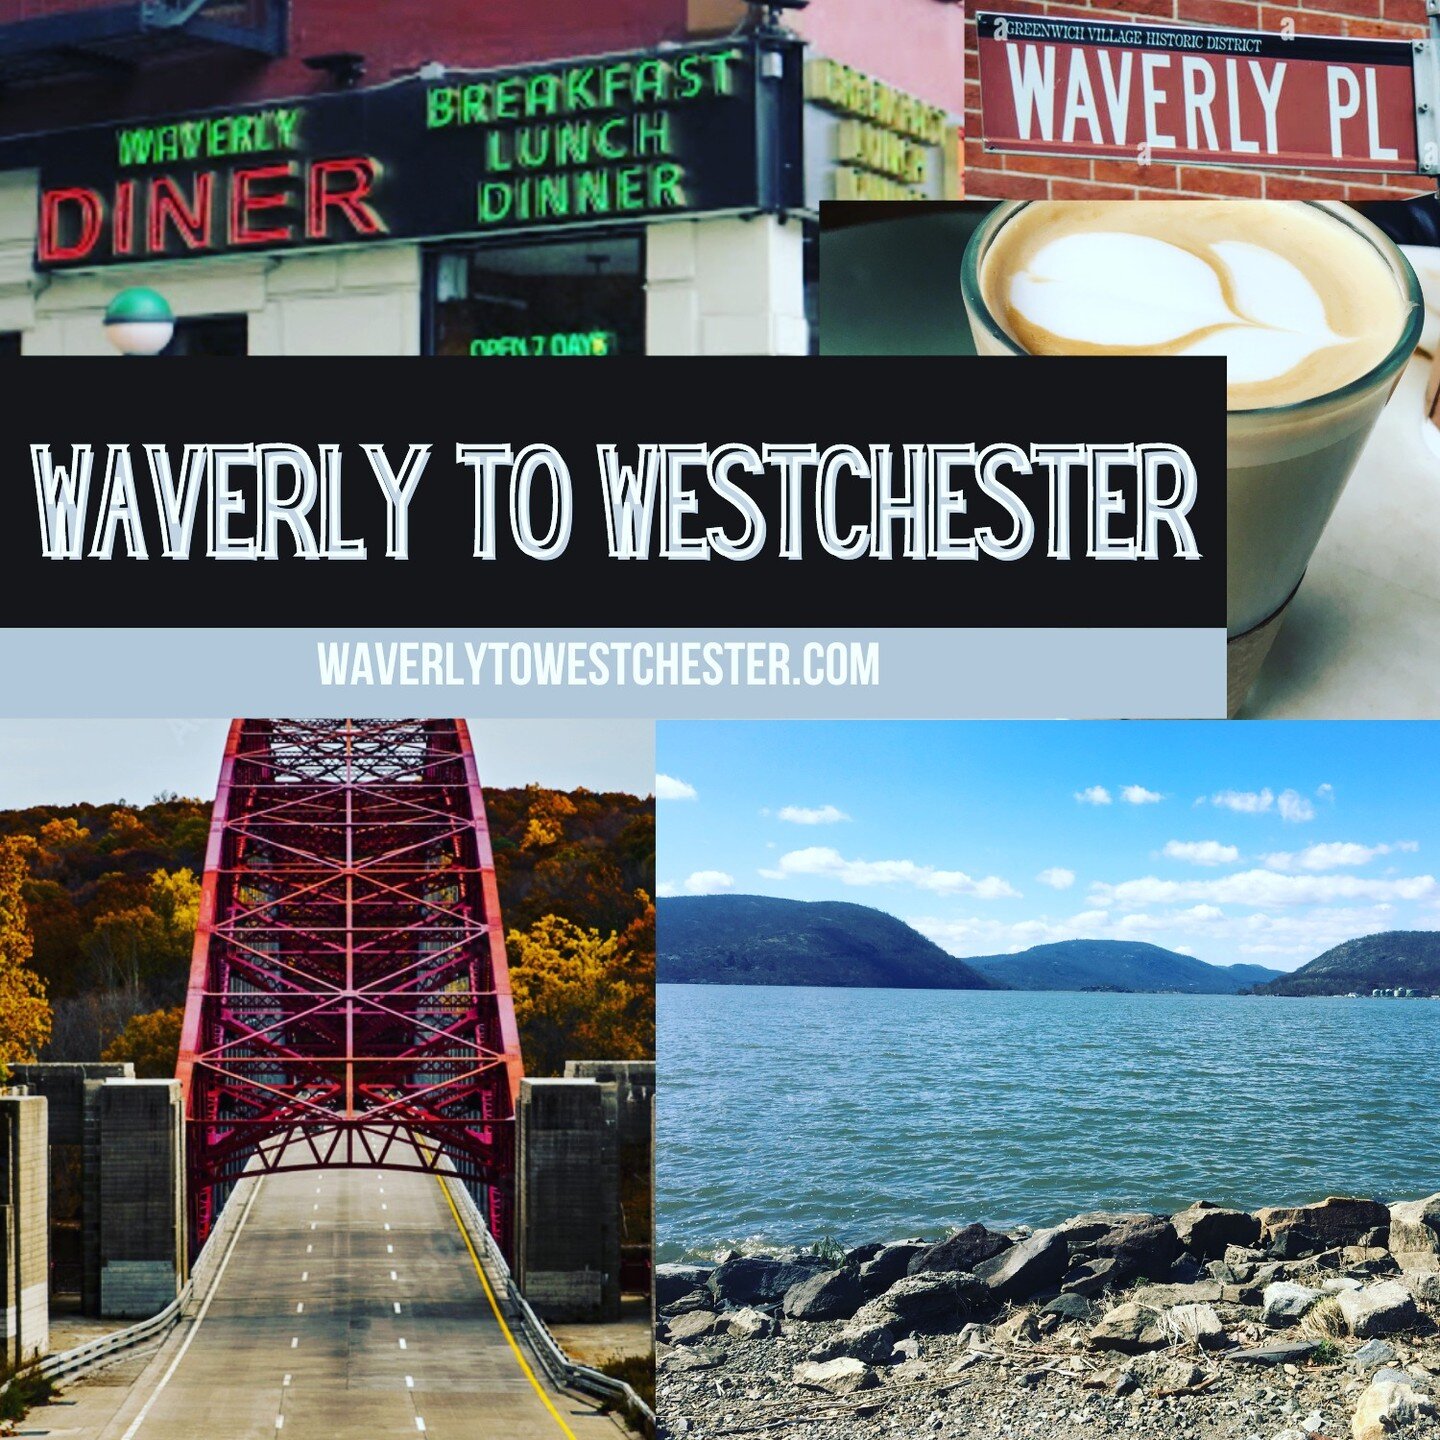 #WAVERLYTOWESTCHESTER

MY JOURNEY... 
FROM THE BIG APPLE
to 
THE SMALL TOWN COUNTRY LIFE

#ﬁrstpost 
#myjourney 
#greenacres 
#waverlyplace 
#nyc 
#thevillage 
#westchester 
#katonah 
#peekskill 
#yorktown 
#followme 
#reallife 
#followalong 
#joinme